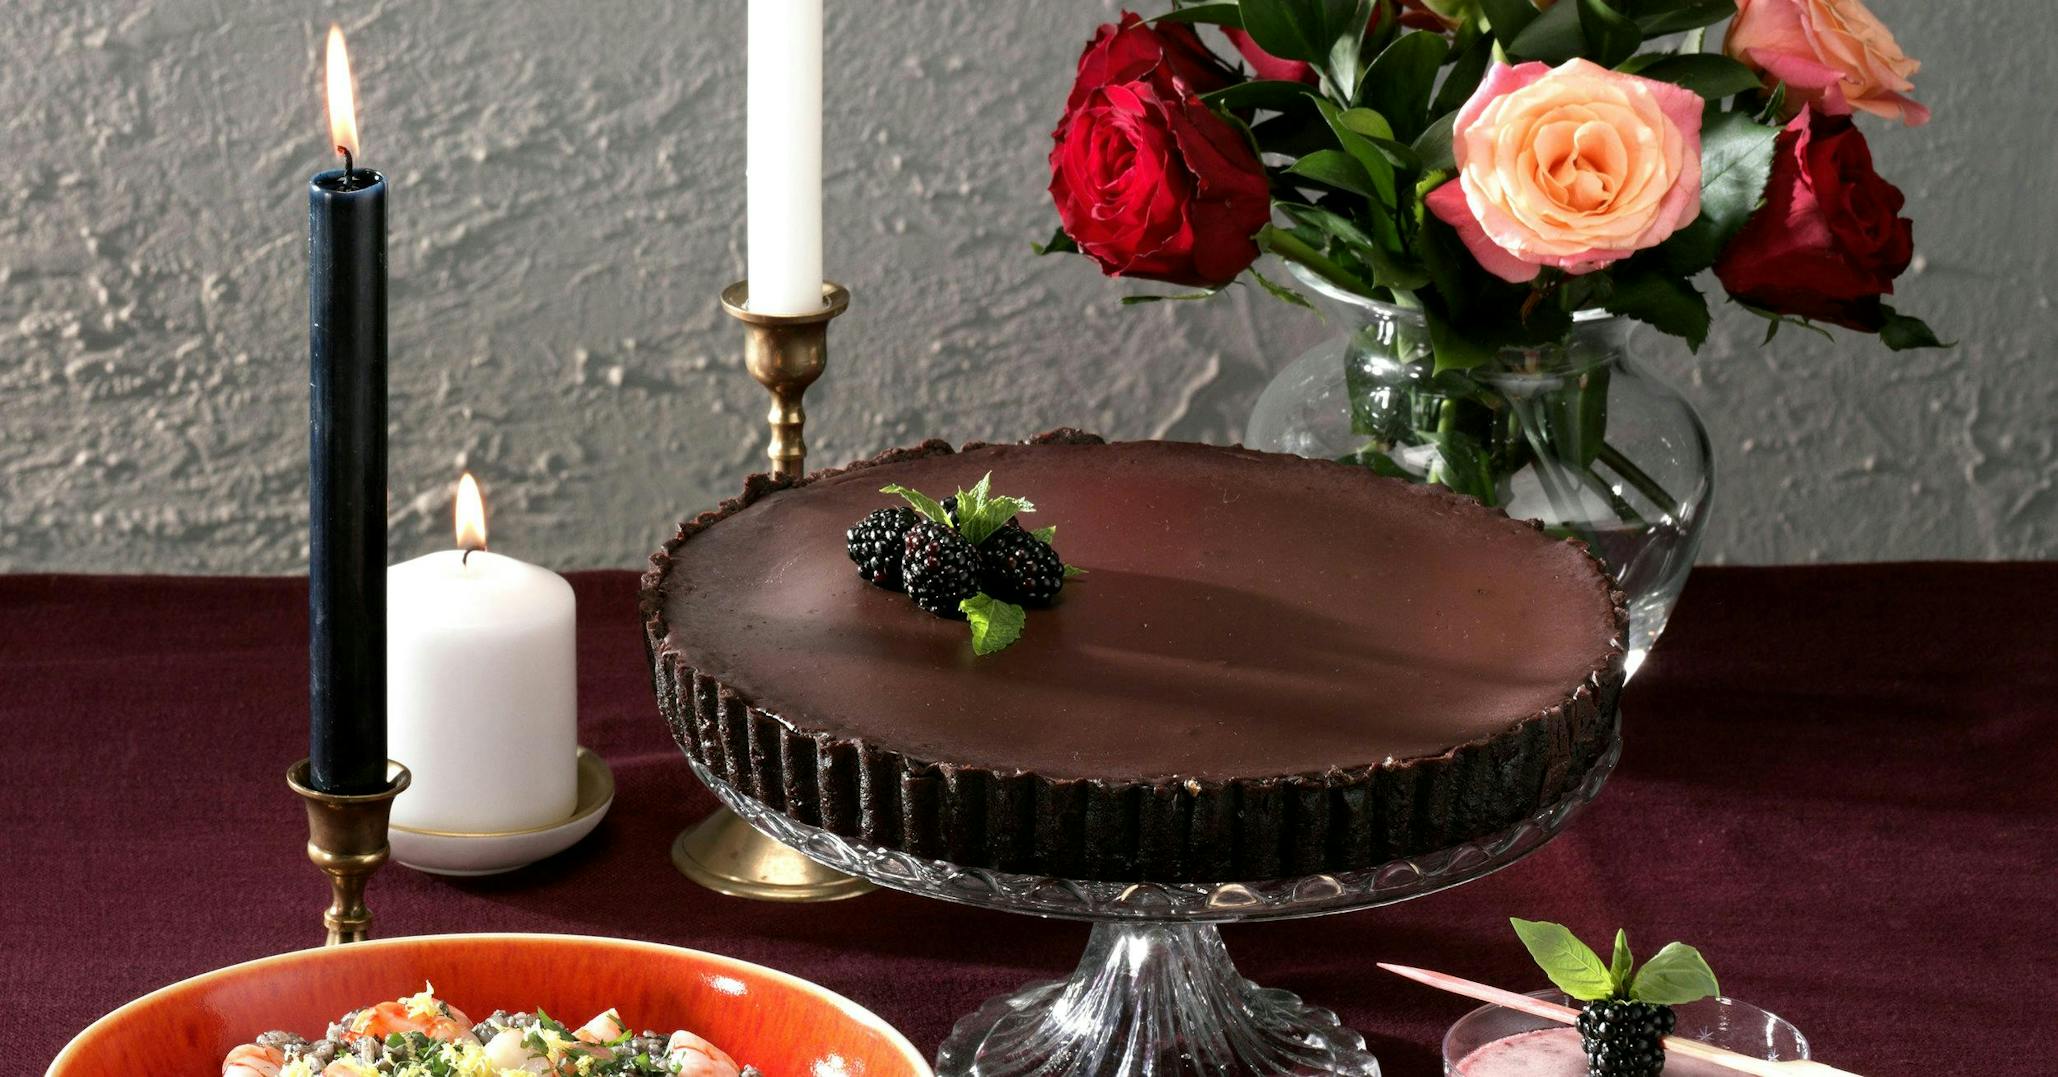 This decadent gin-spiked chocolate & blackberry tart is the dinner party dessert of our dreams!